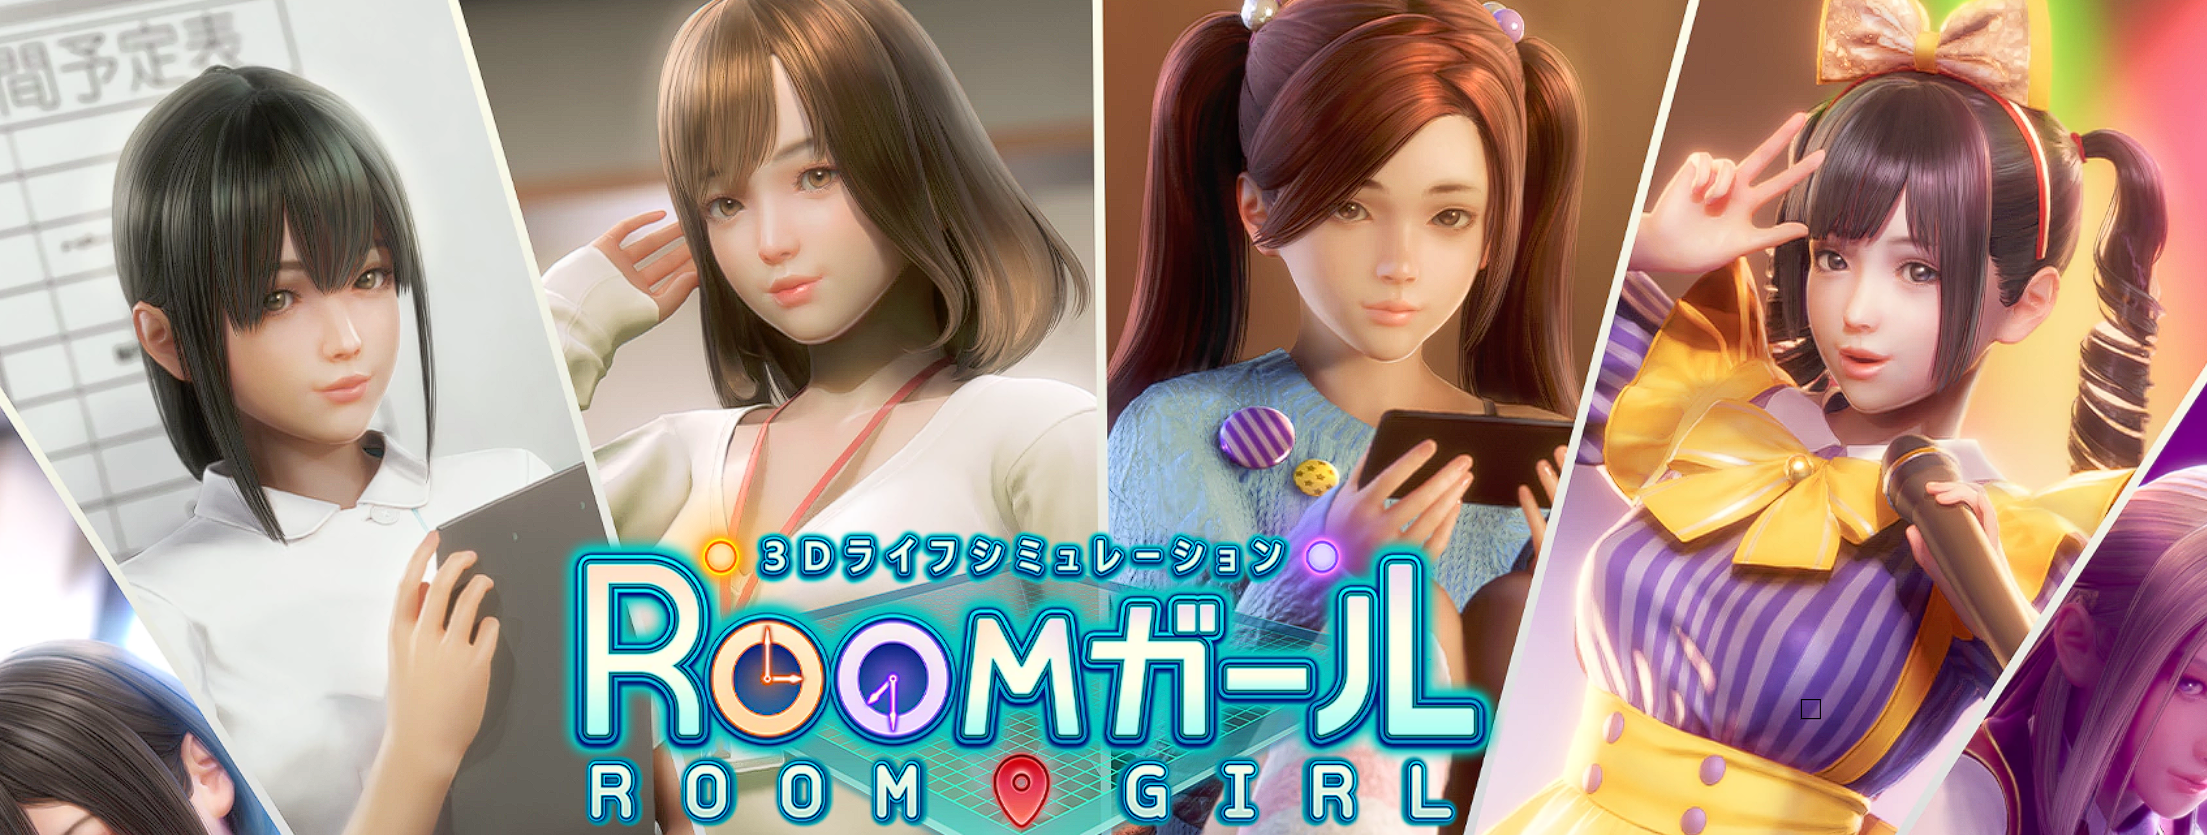 Roomgirl_01_trial.exe